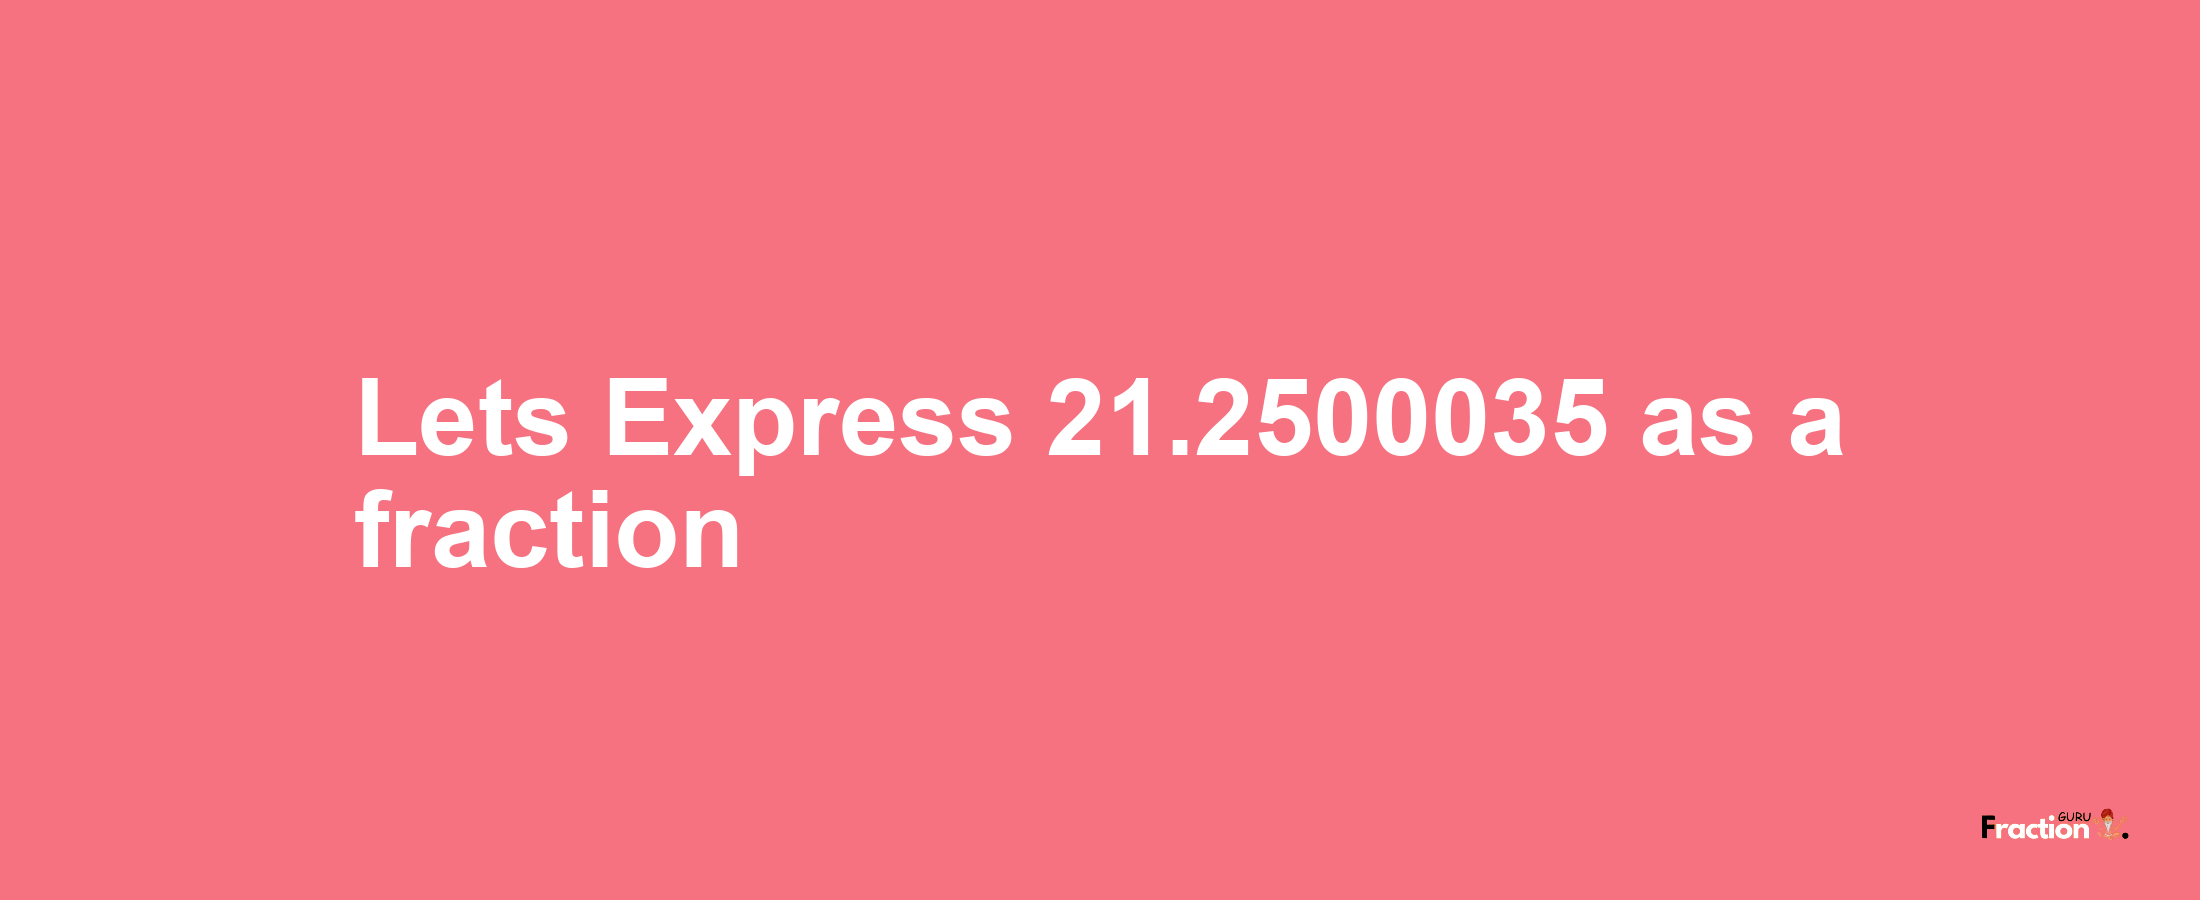 Lets Express 21.2500035 as afraction